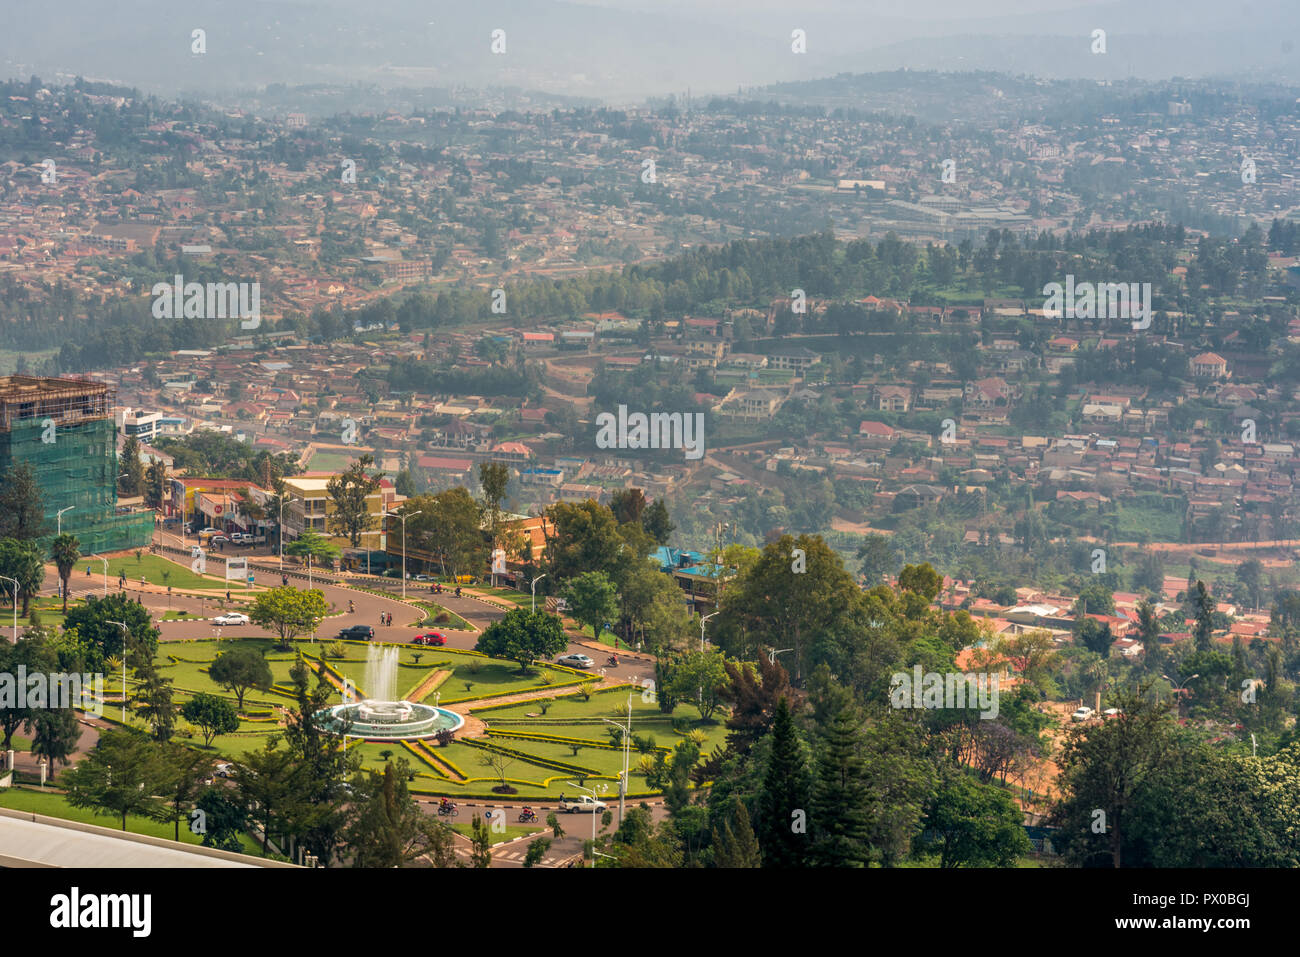 Kigali, Rwanda - September 21, 2018: A high angle view of the fountain roundabout near the city centre with rows of hills fading into the distance Stock Photo